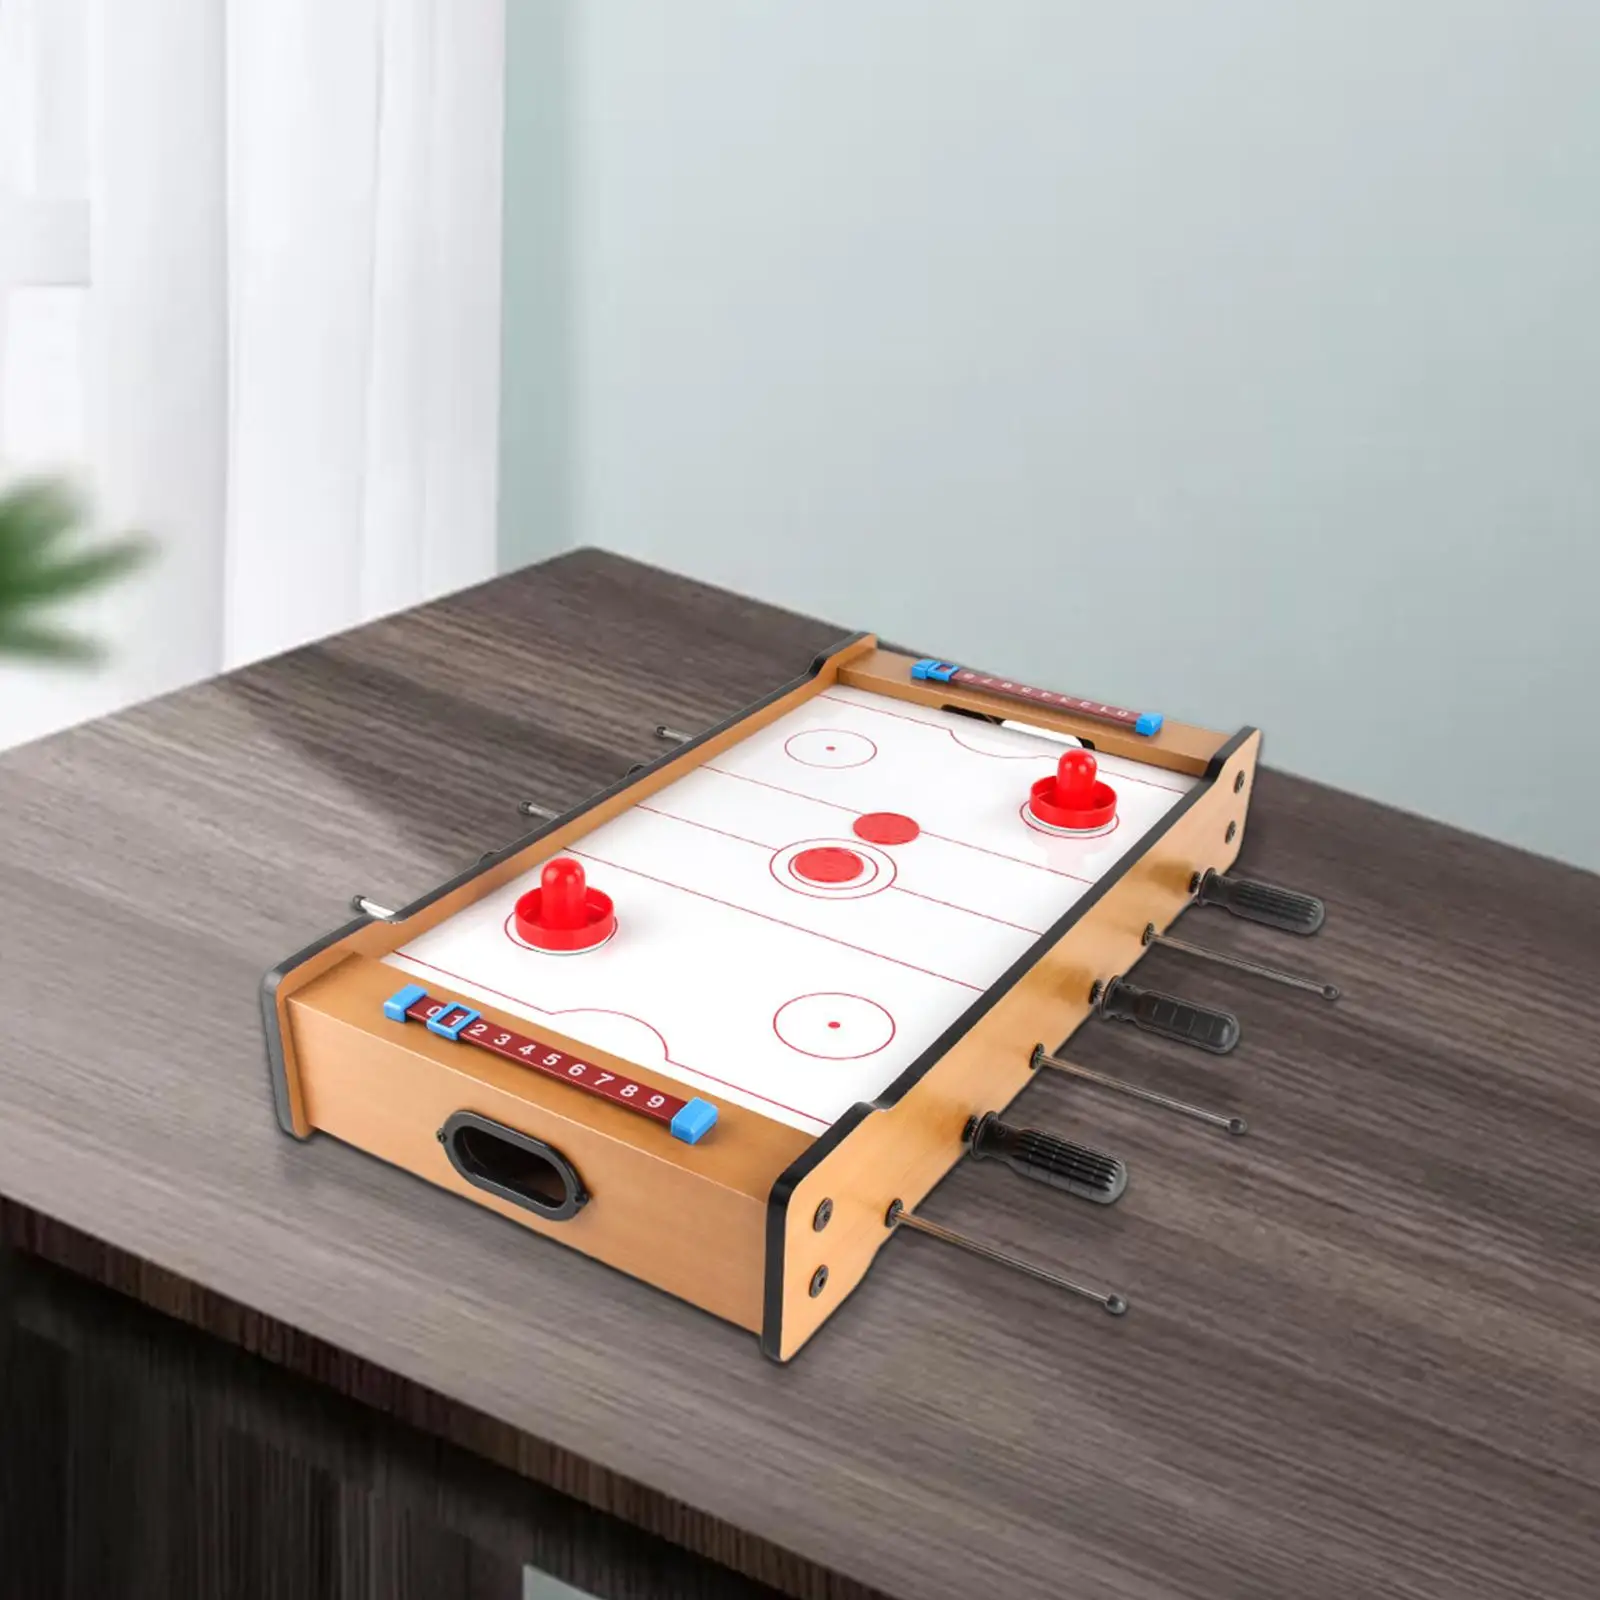 Cute Soccer Hockey Game Set, Board, Tabletop for Entertainment